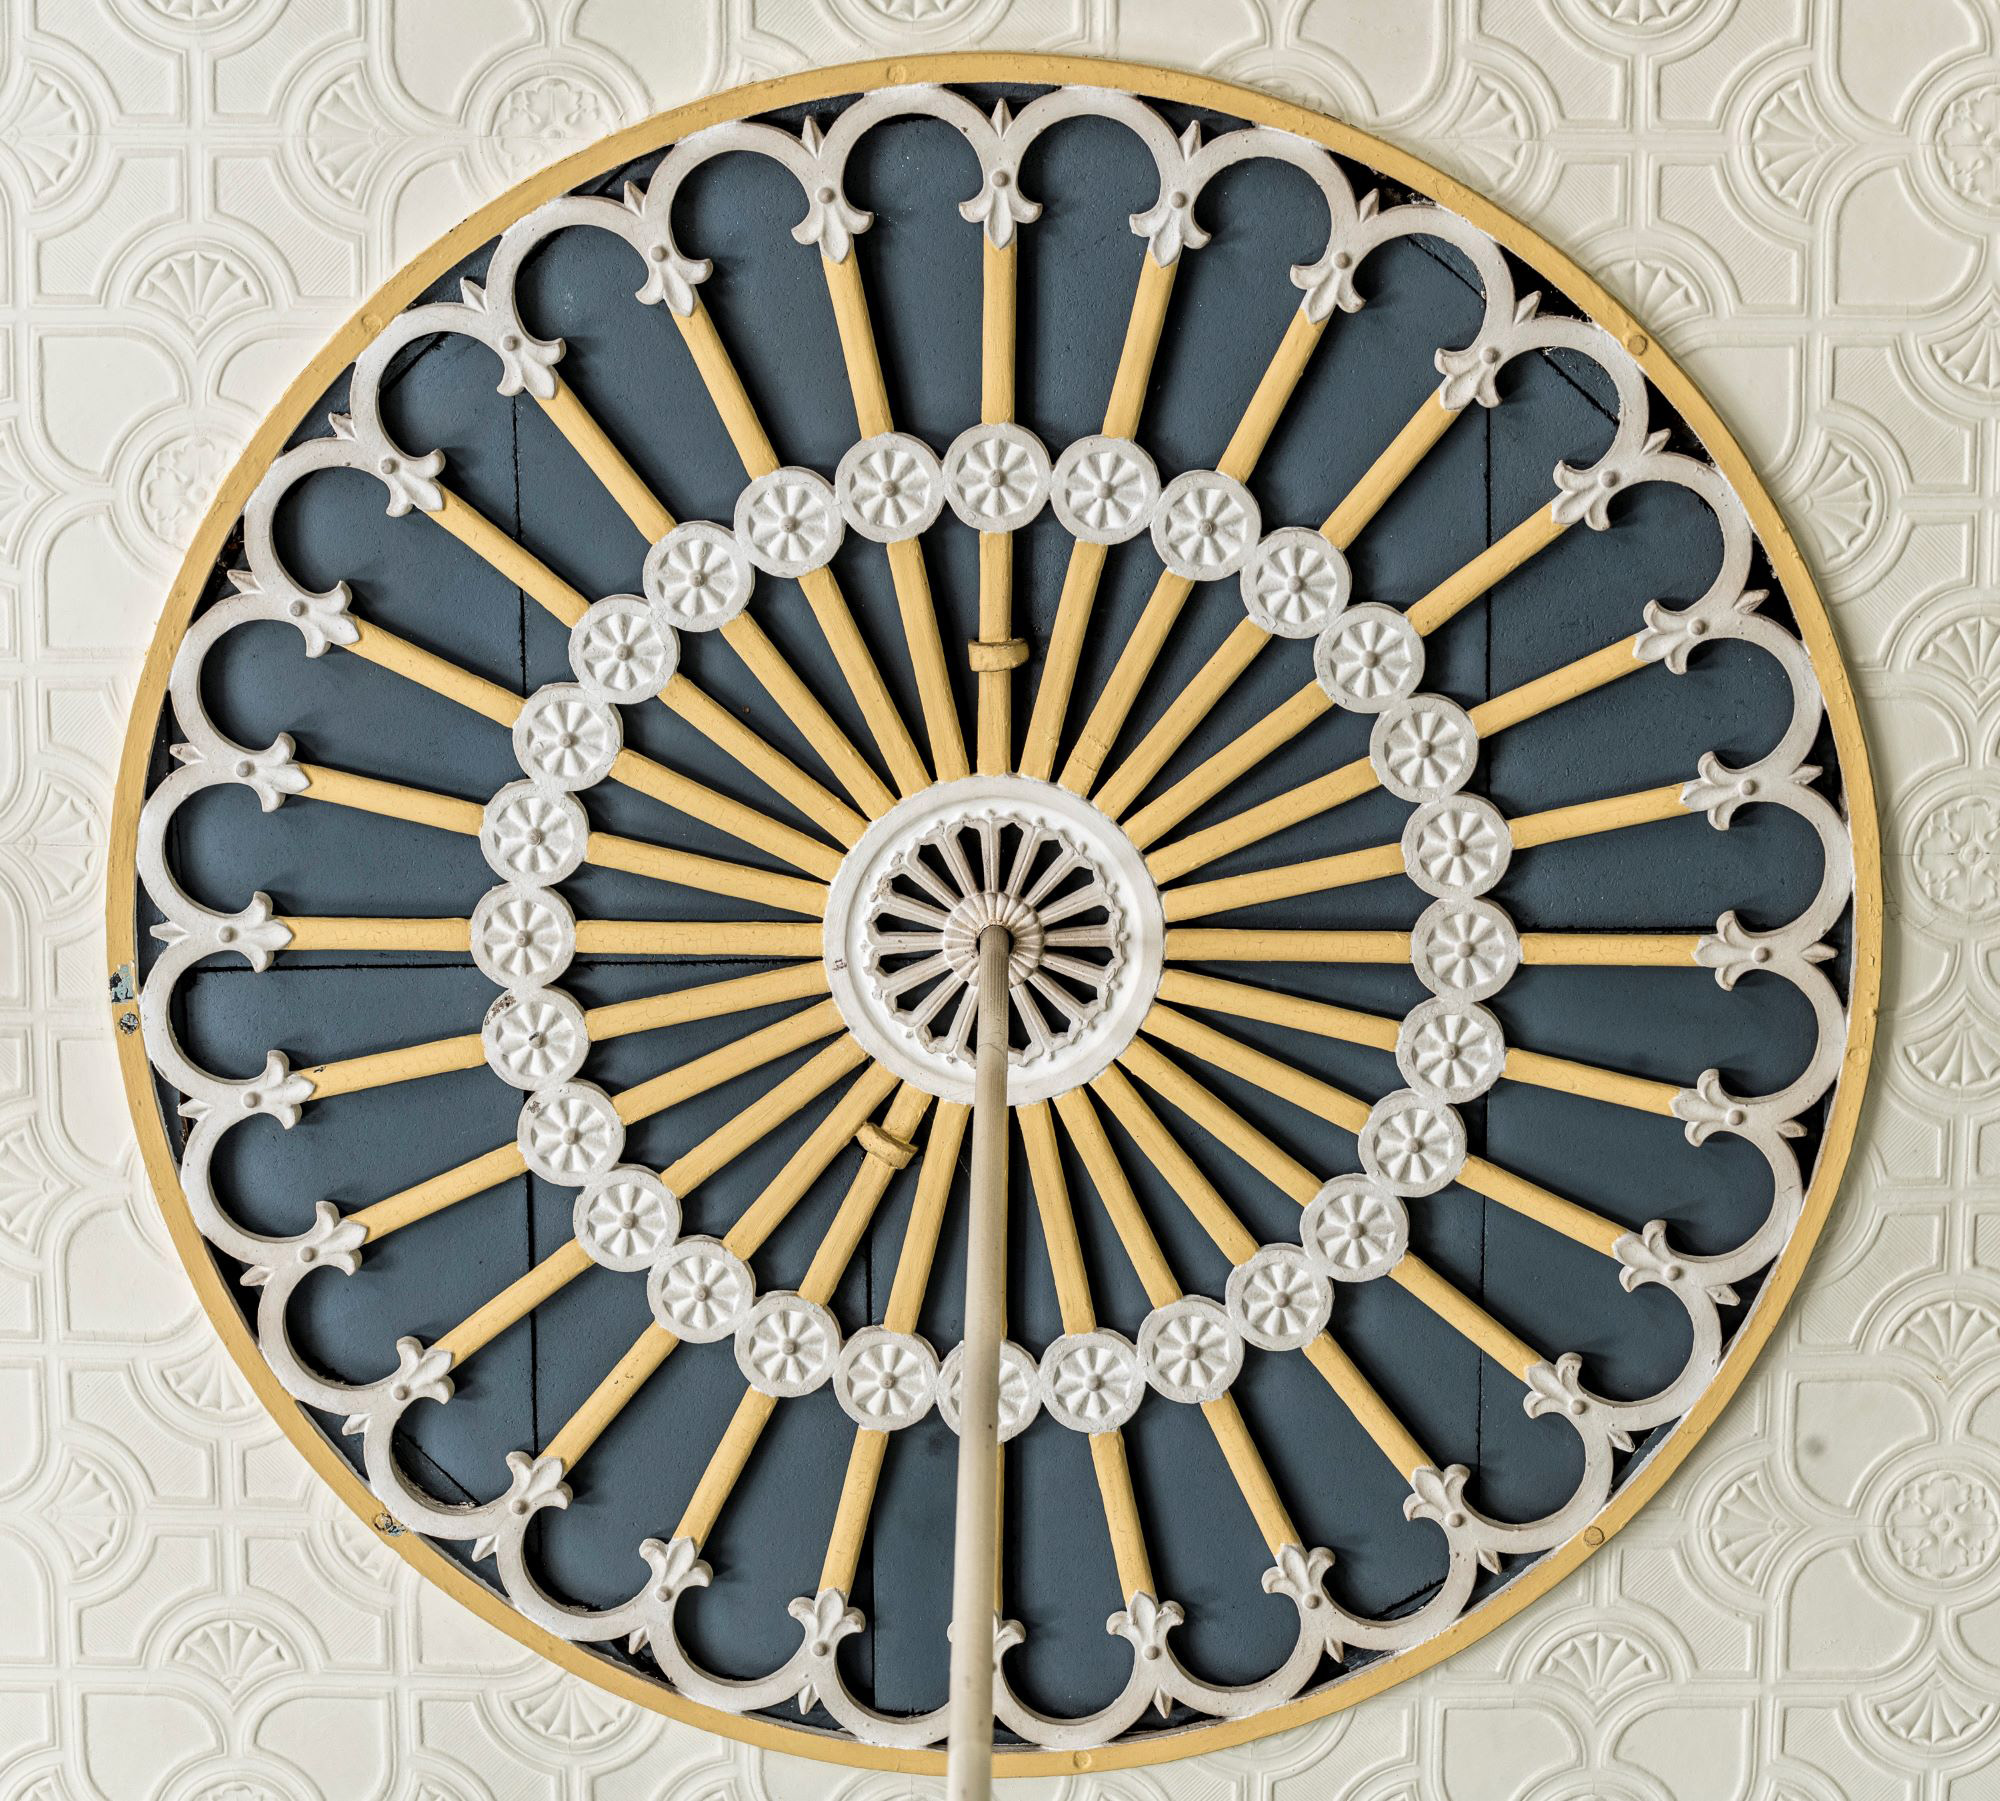 Decorative ceiling rose painted yellow and blue